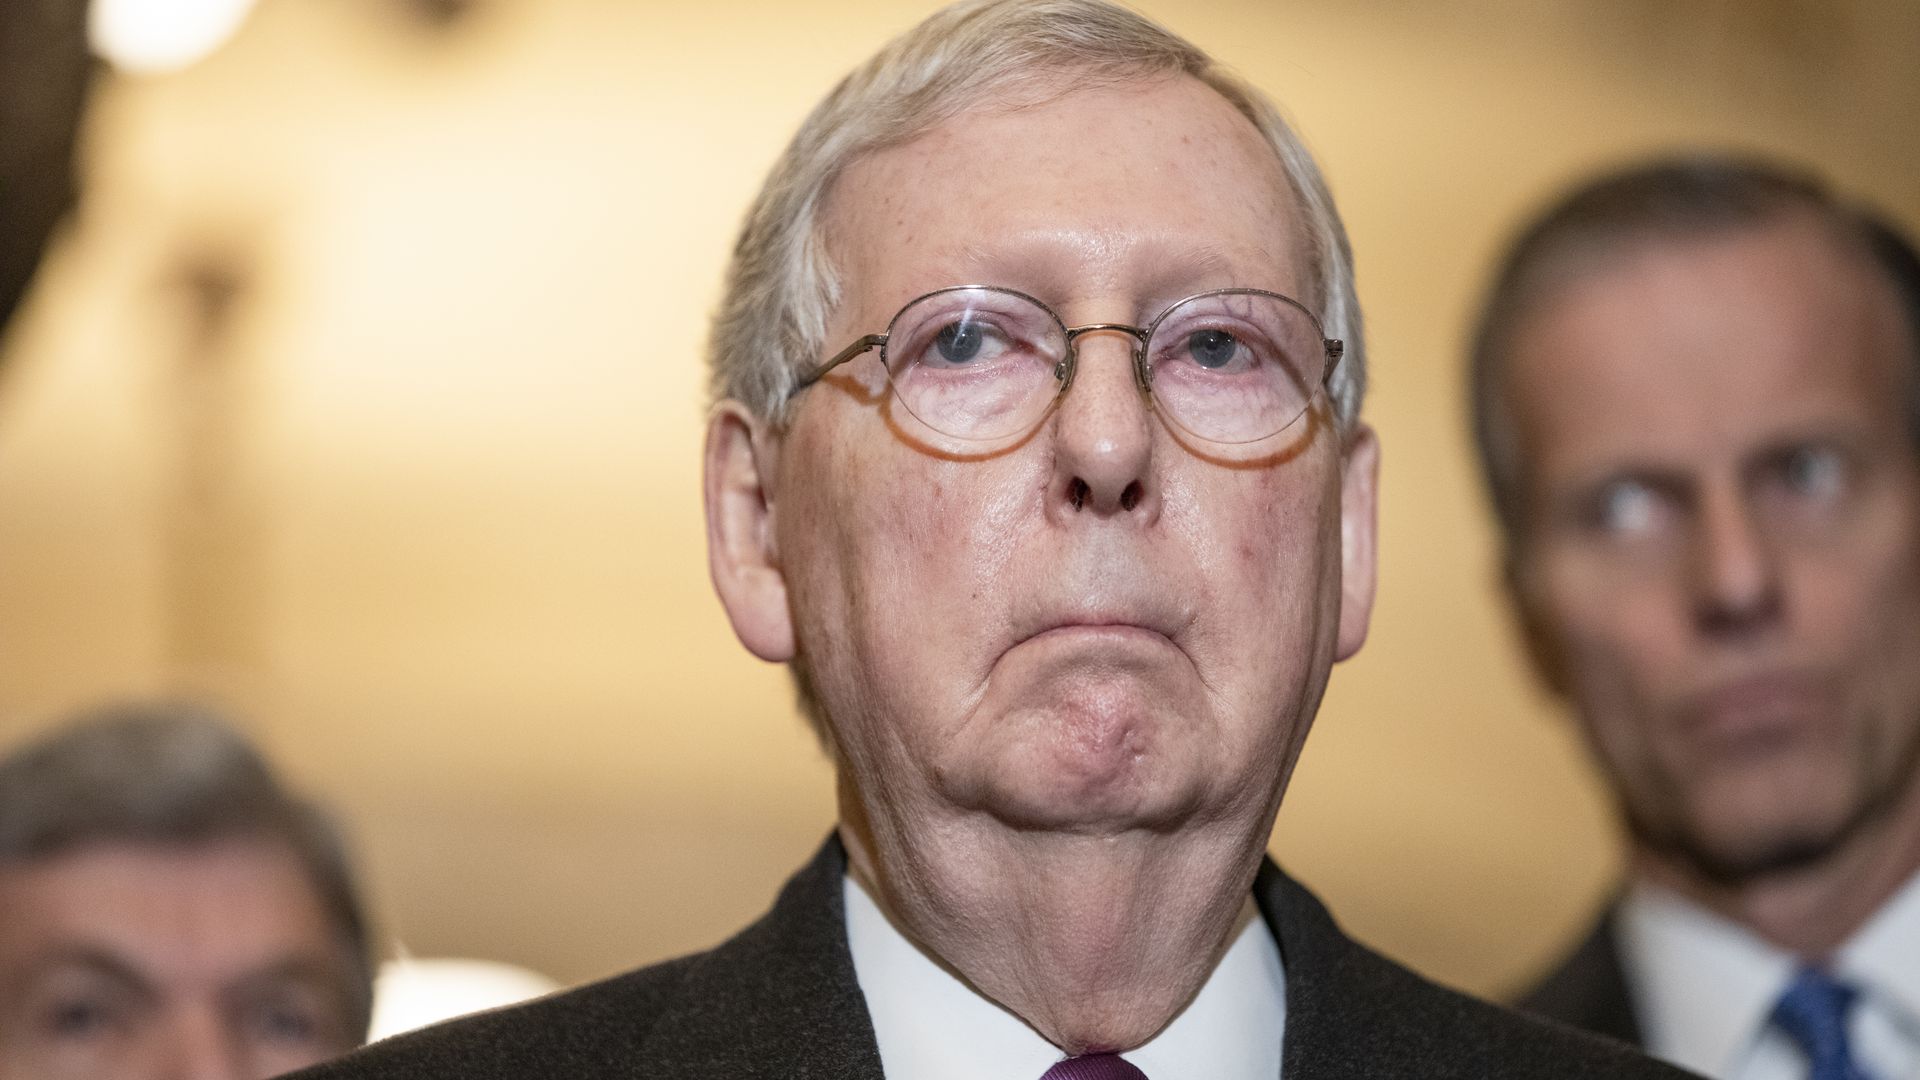 Photo of Mitch McConnell, Senate majority leader, pursing his lips